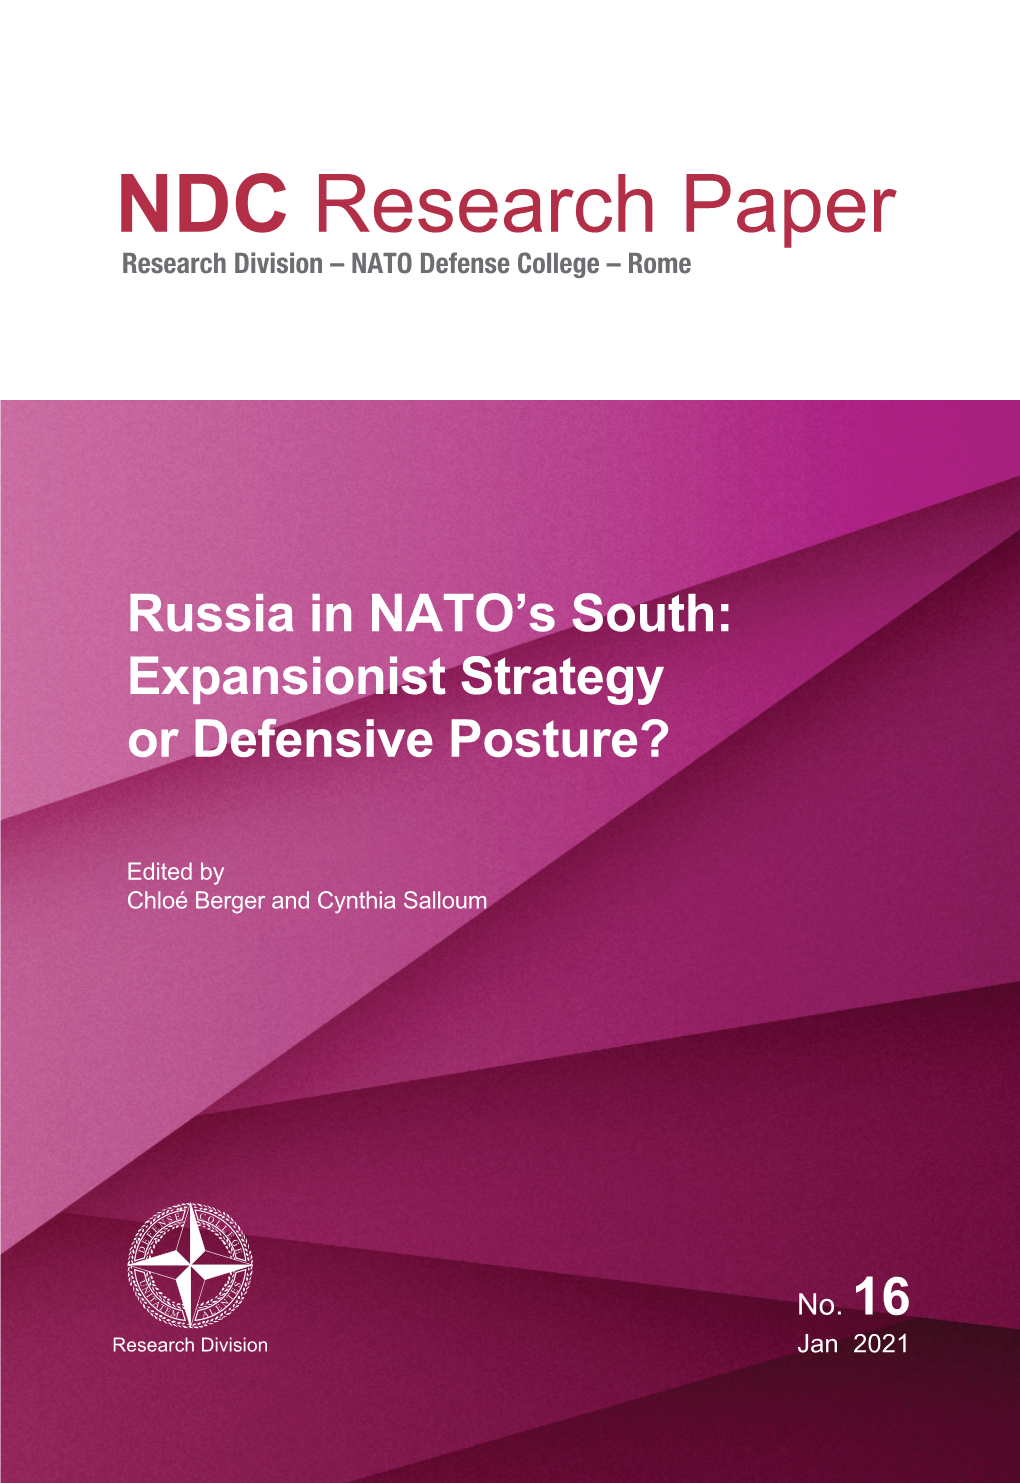 Russia in NATO's South: Expansionist Strategy Or Defensive Posture?